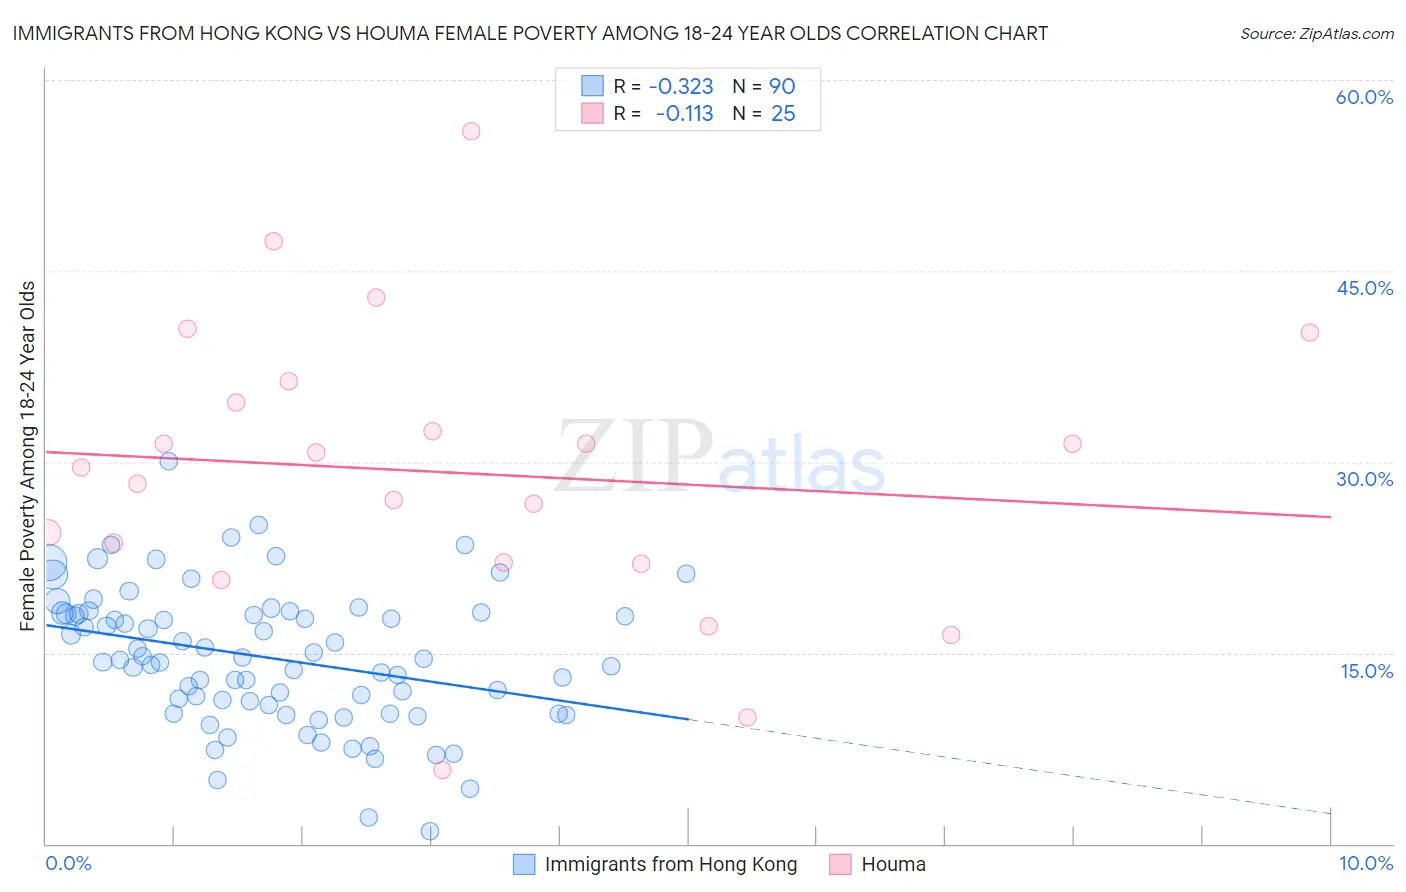 Immigrants from Hong Kong vs Houma Female Poverty Among 18-24 Year Olds